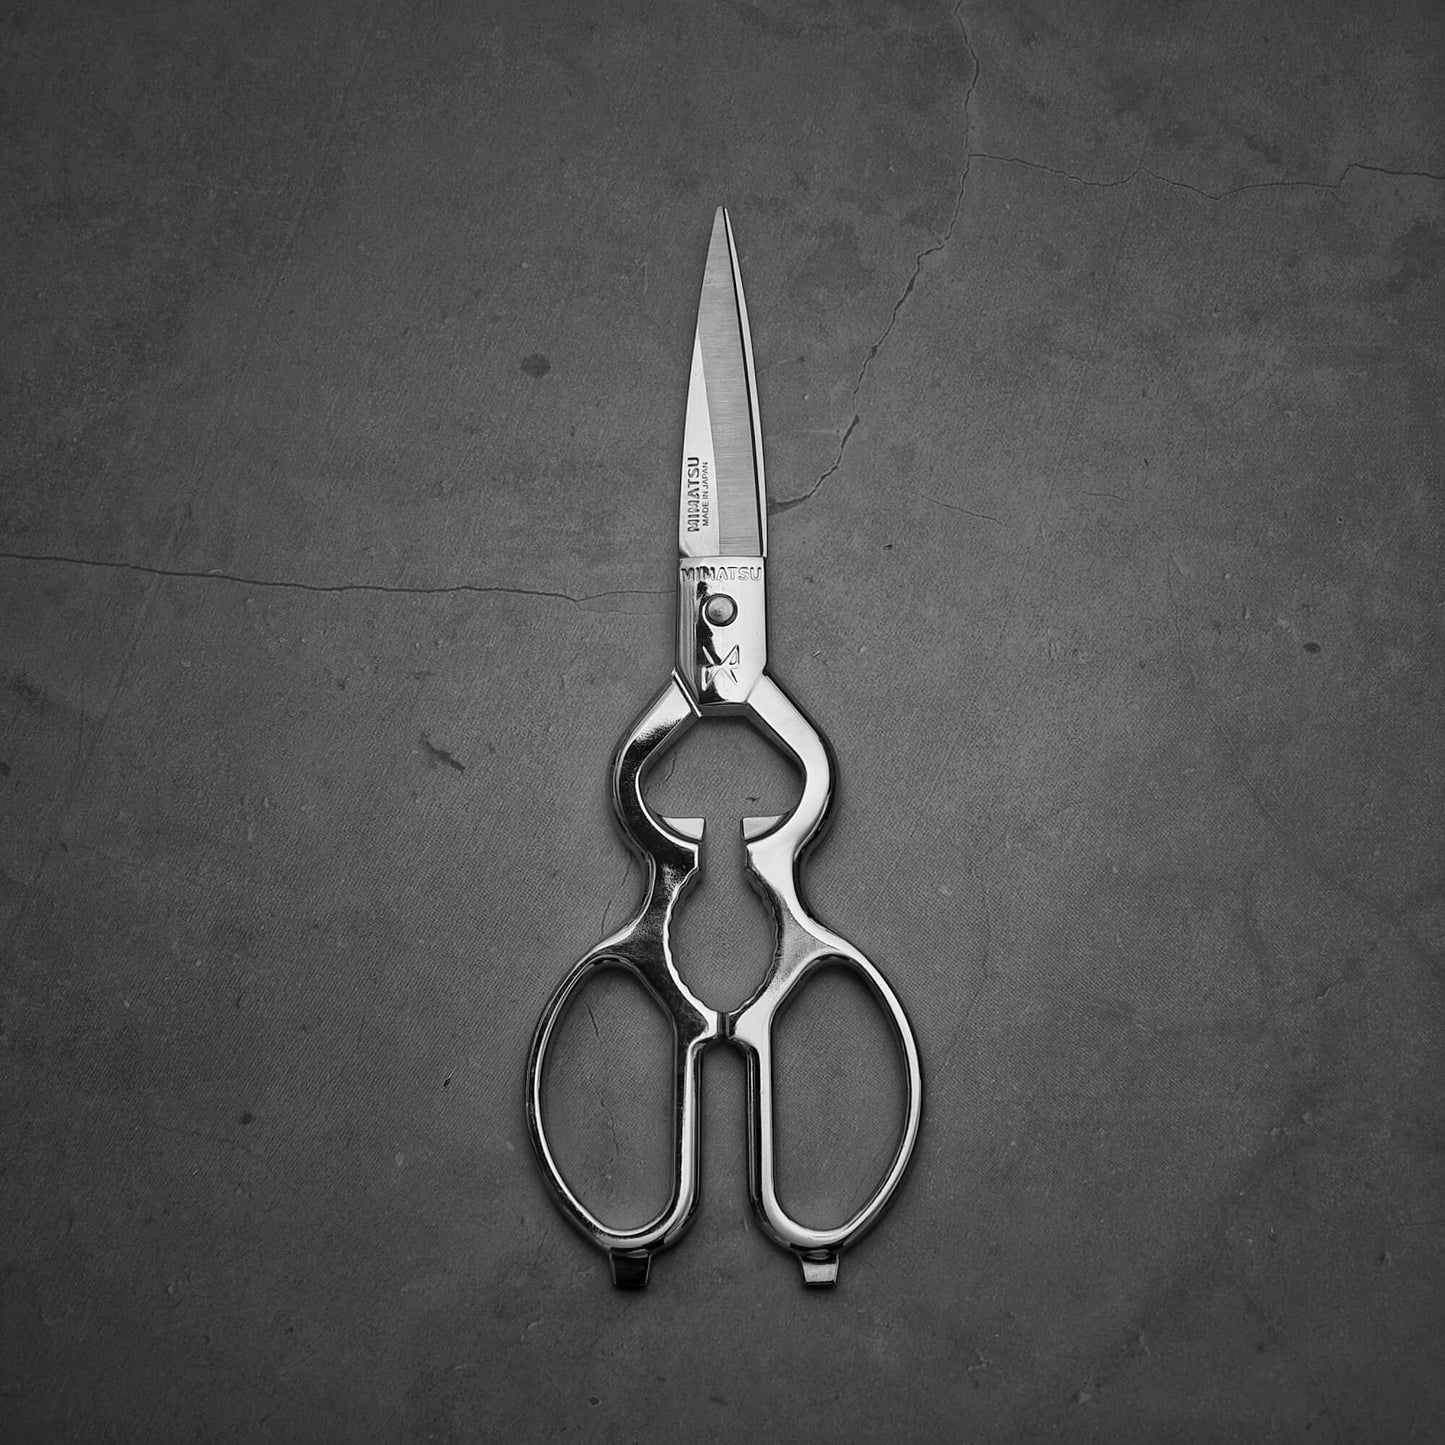 Top down view of Mimatsu 200mm kitchen shears: Japan-made all-stainless, durable shears for a variety of kitchen tasks. 